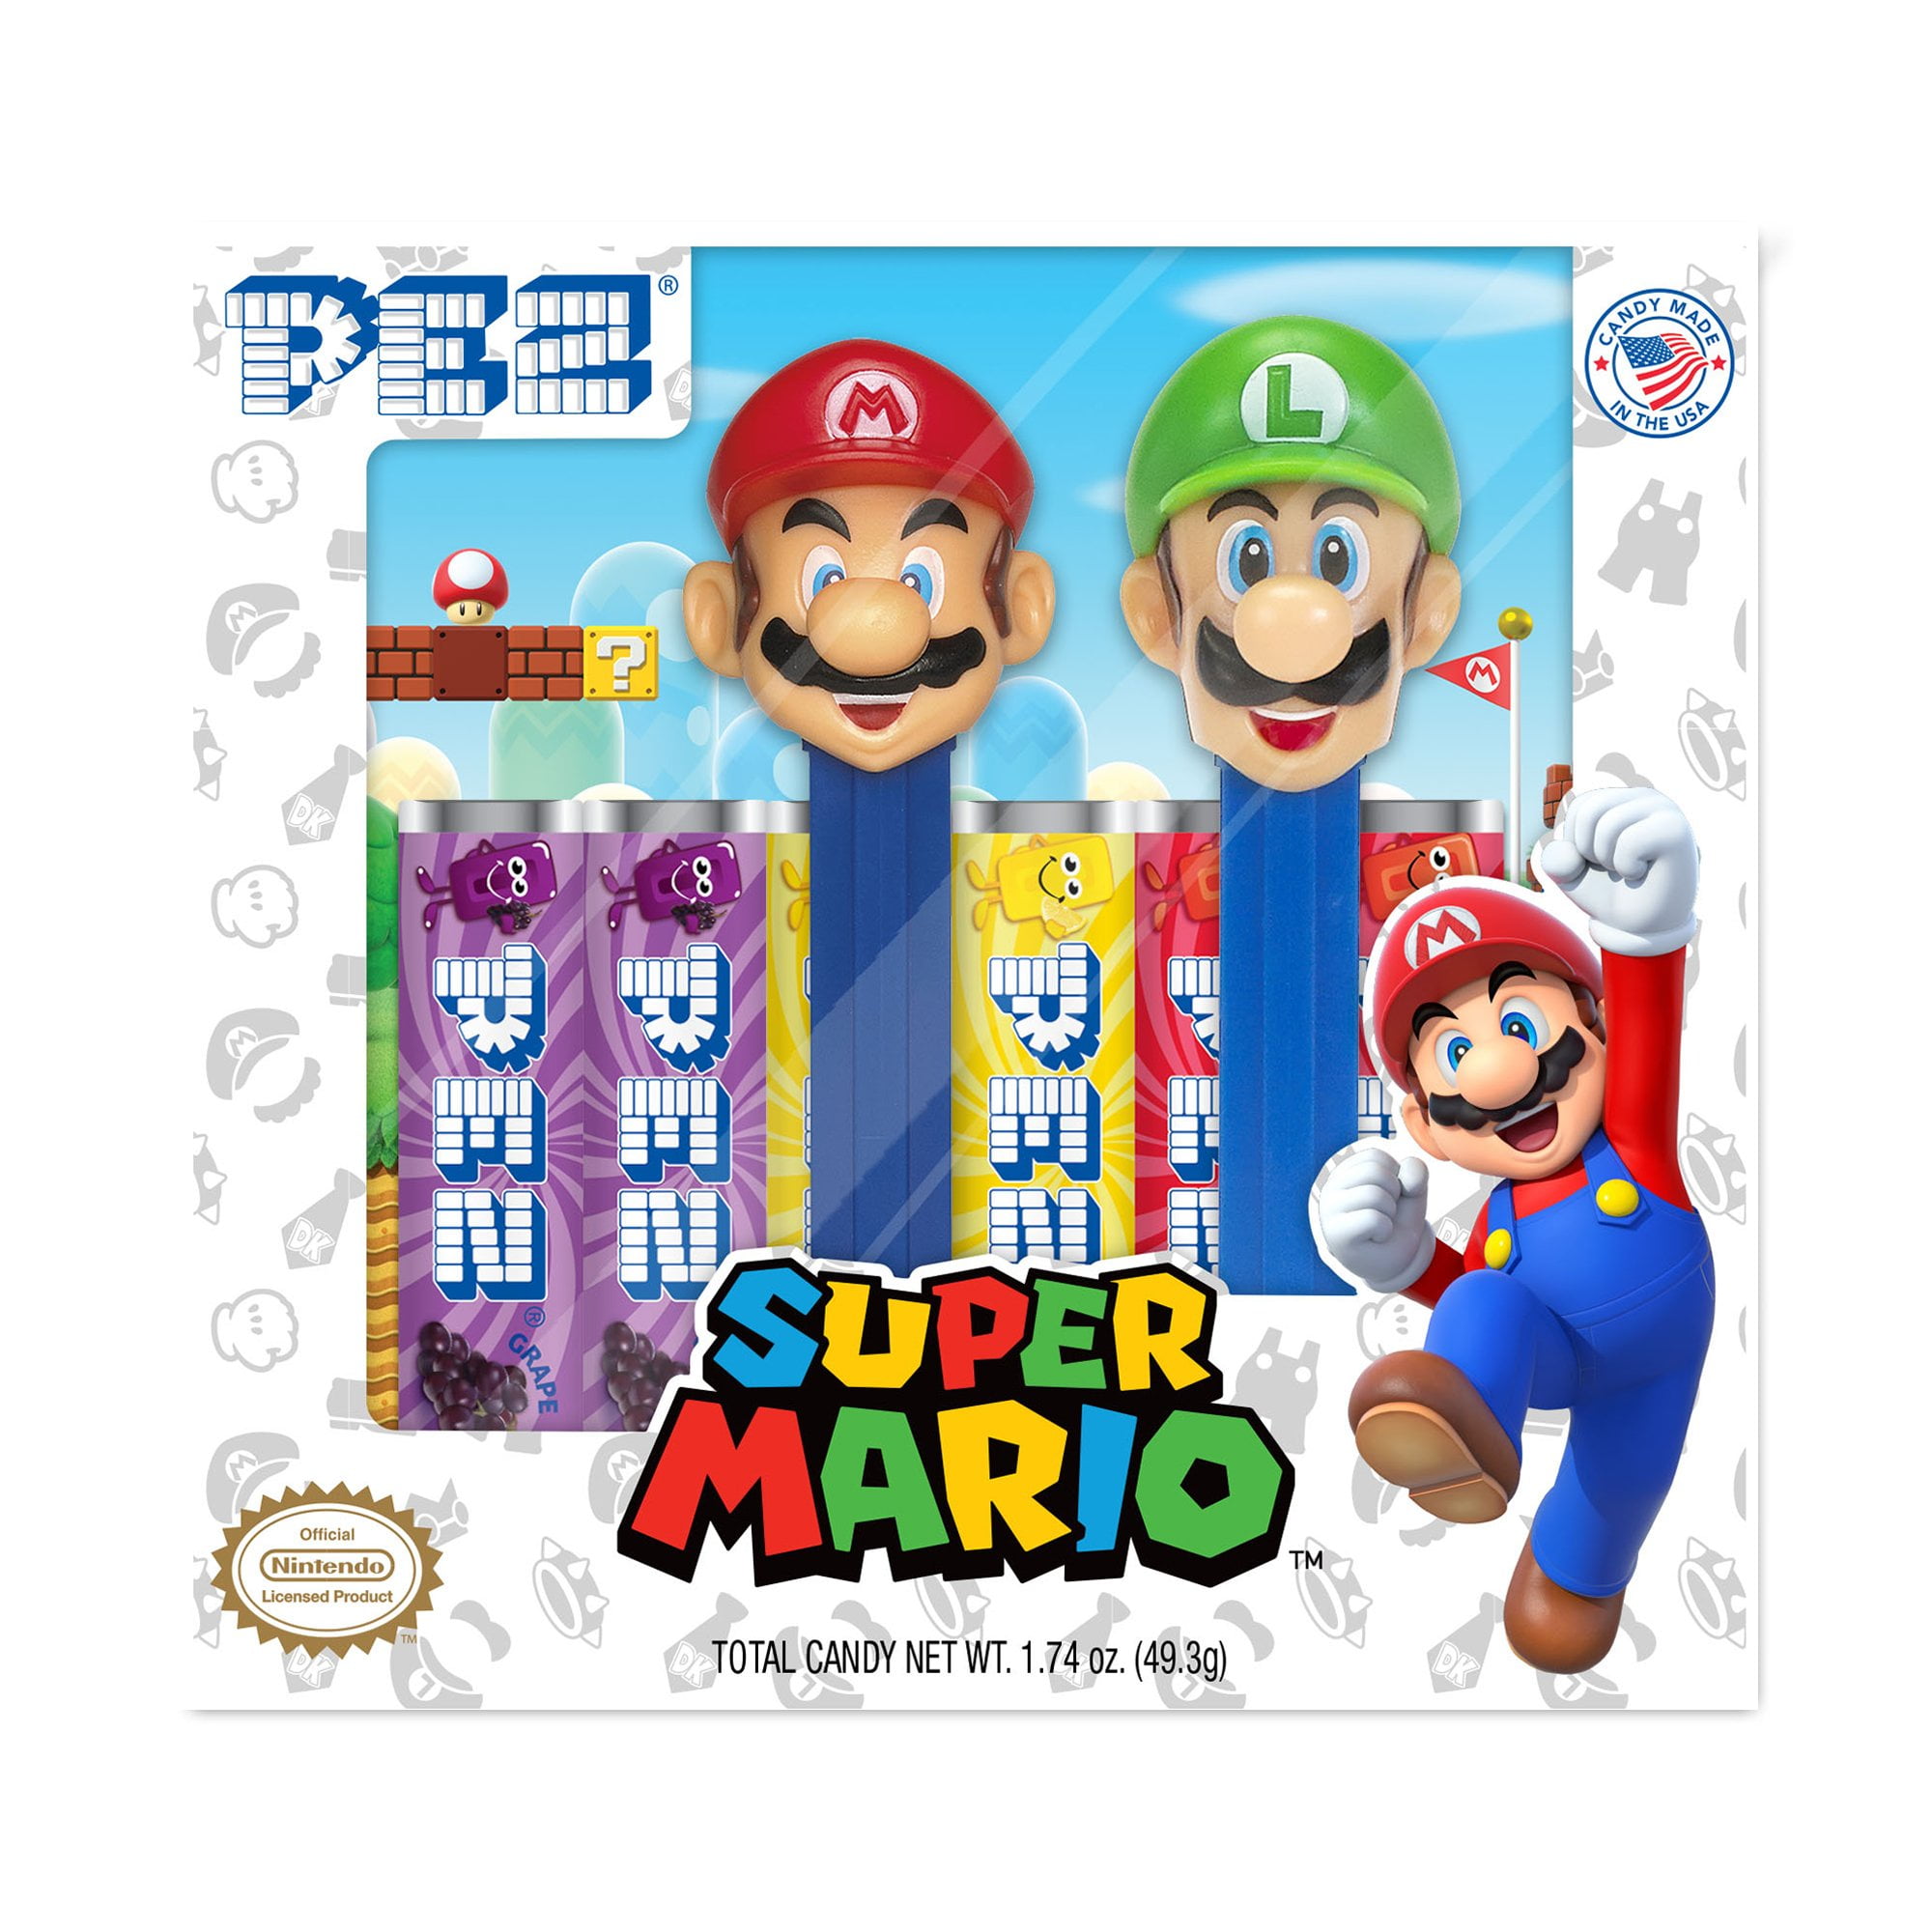 NEW Pez Super Mario Bros Donkey Kong Red 2 Candy Refills 